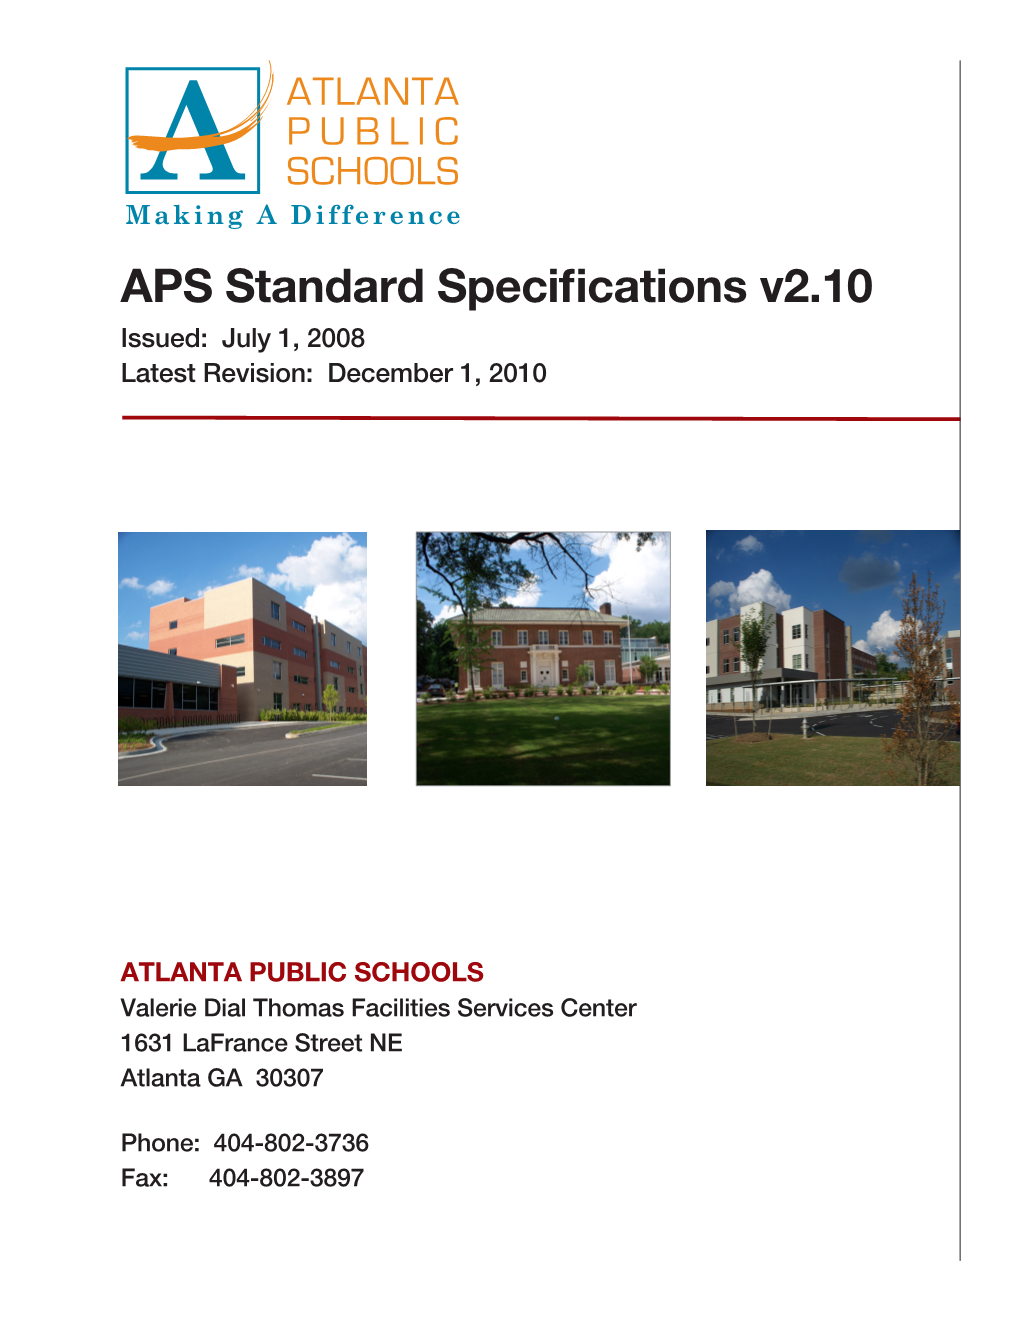 APS Standard Specifications V2.10 Issued: July 1, 2008 Latest Revision: December 1, 2010